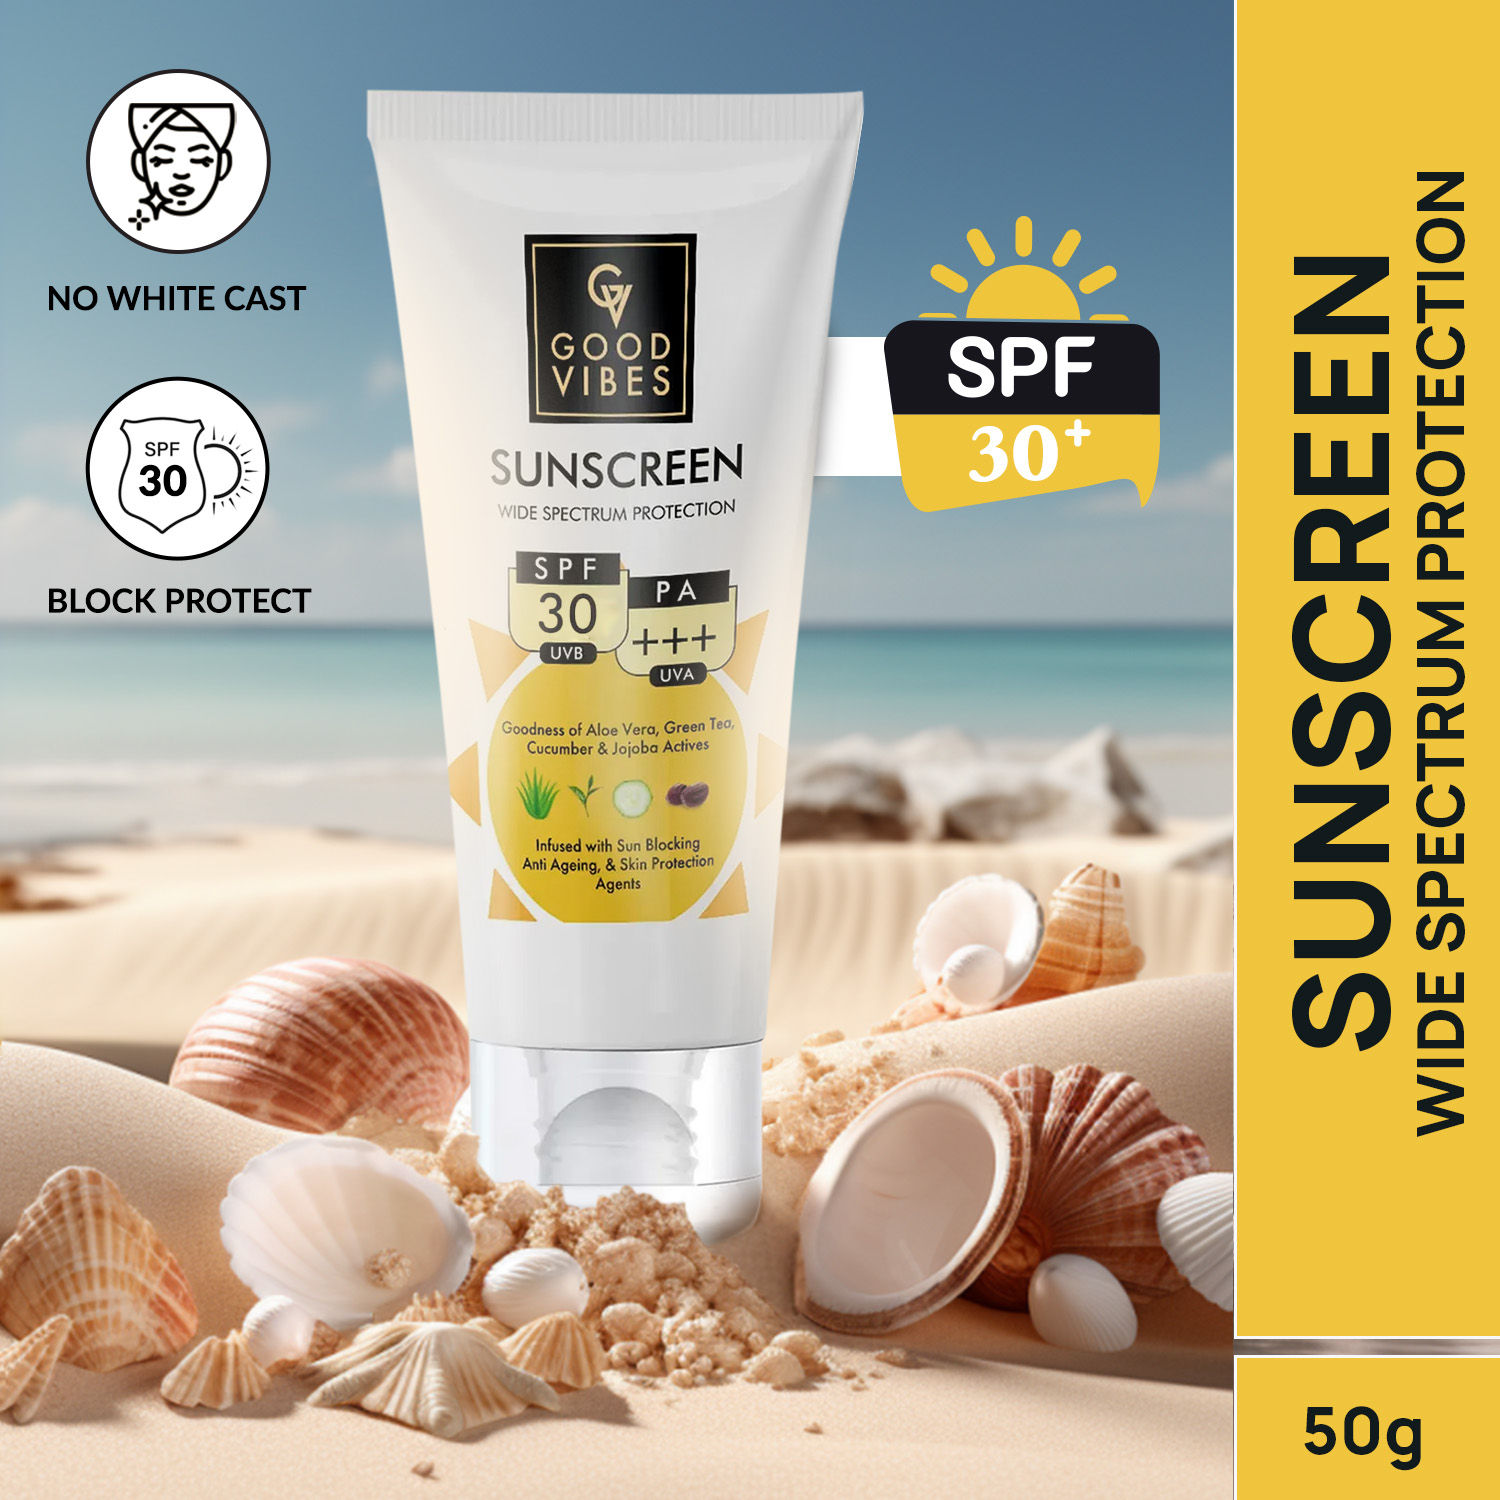 Buy Good Vibes Wide Spectrum Protection Sunscreen with SPF 30 | Non-Greasy, Anti-Ageing | With Aloe Vera | No Parabens, No Animal Testing (50 g) - Purplle